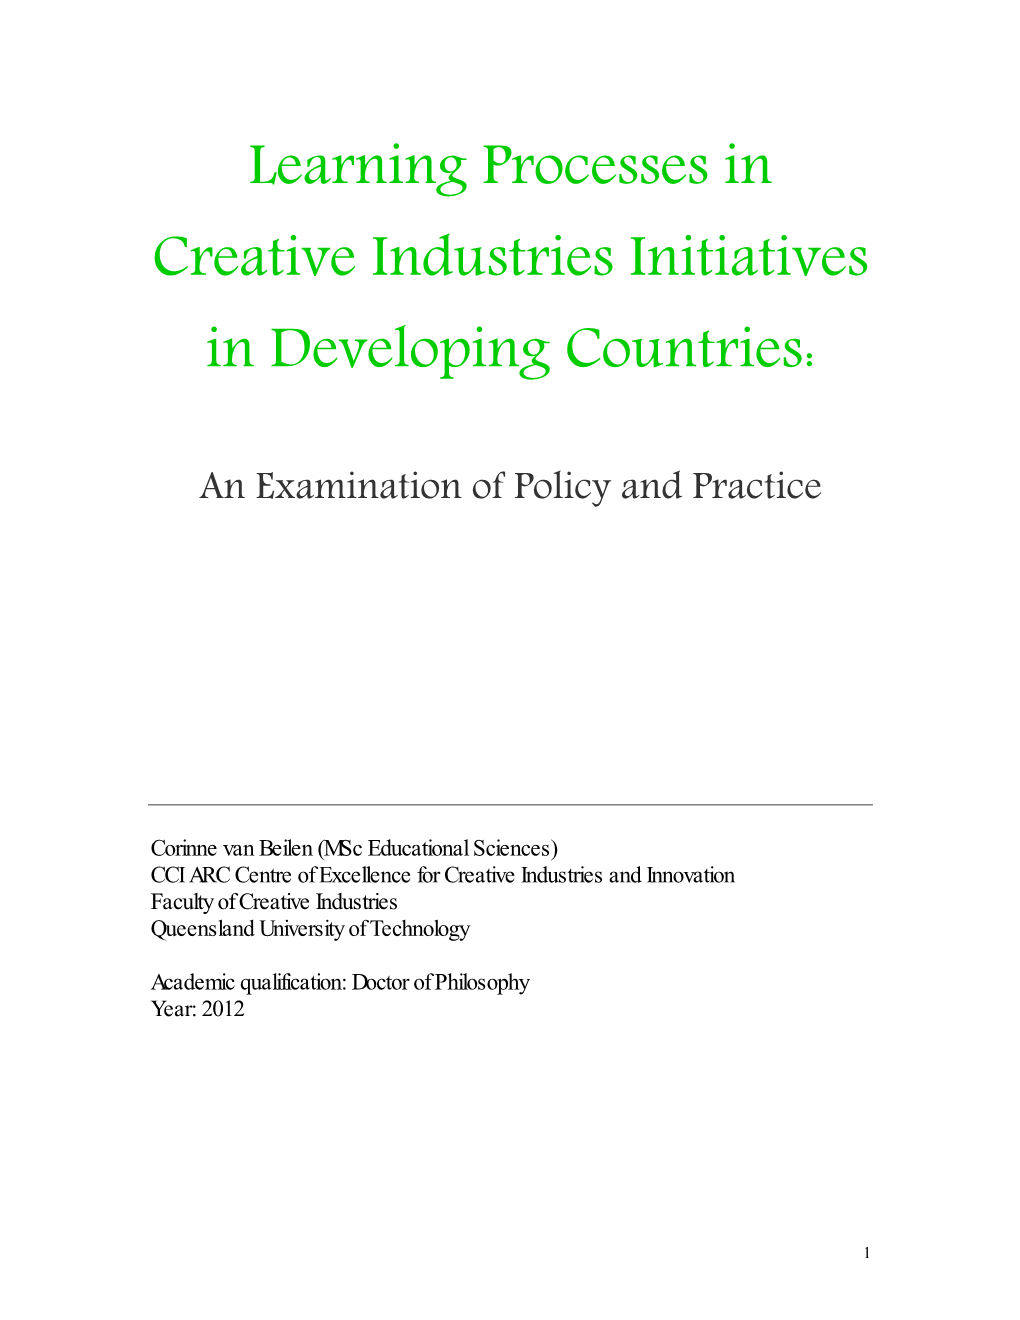 Learning Processes in Creative Industries Initiatives in Developing Countries